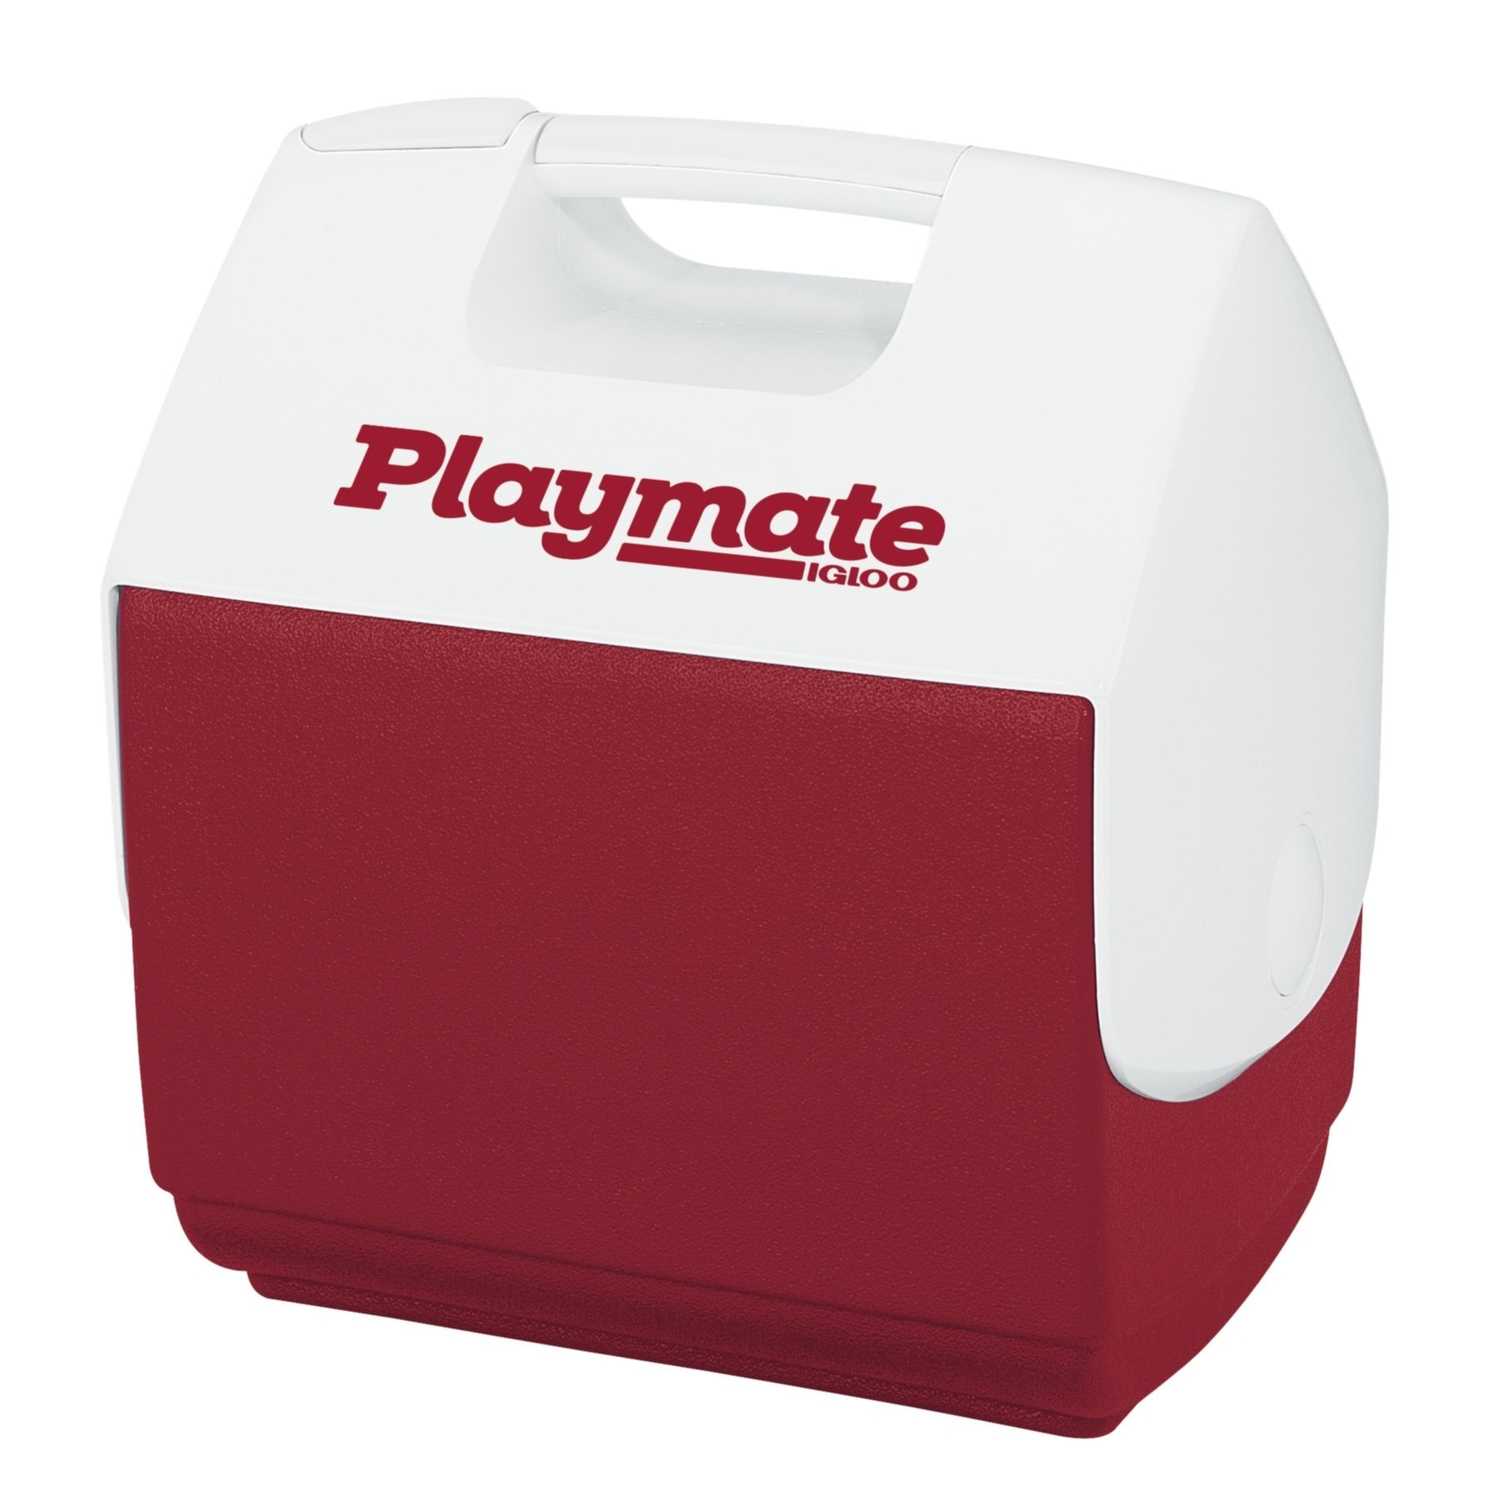 Igloo Playmate Pal Cooler  7 qt Red Ace  Hardware 